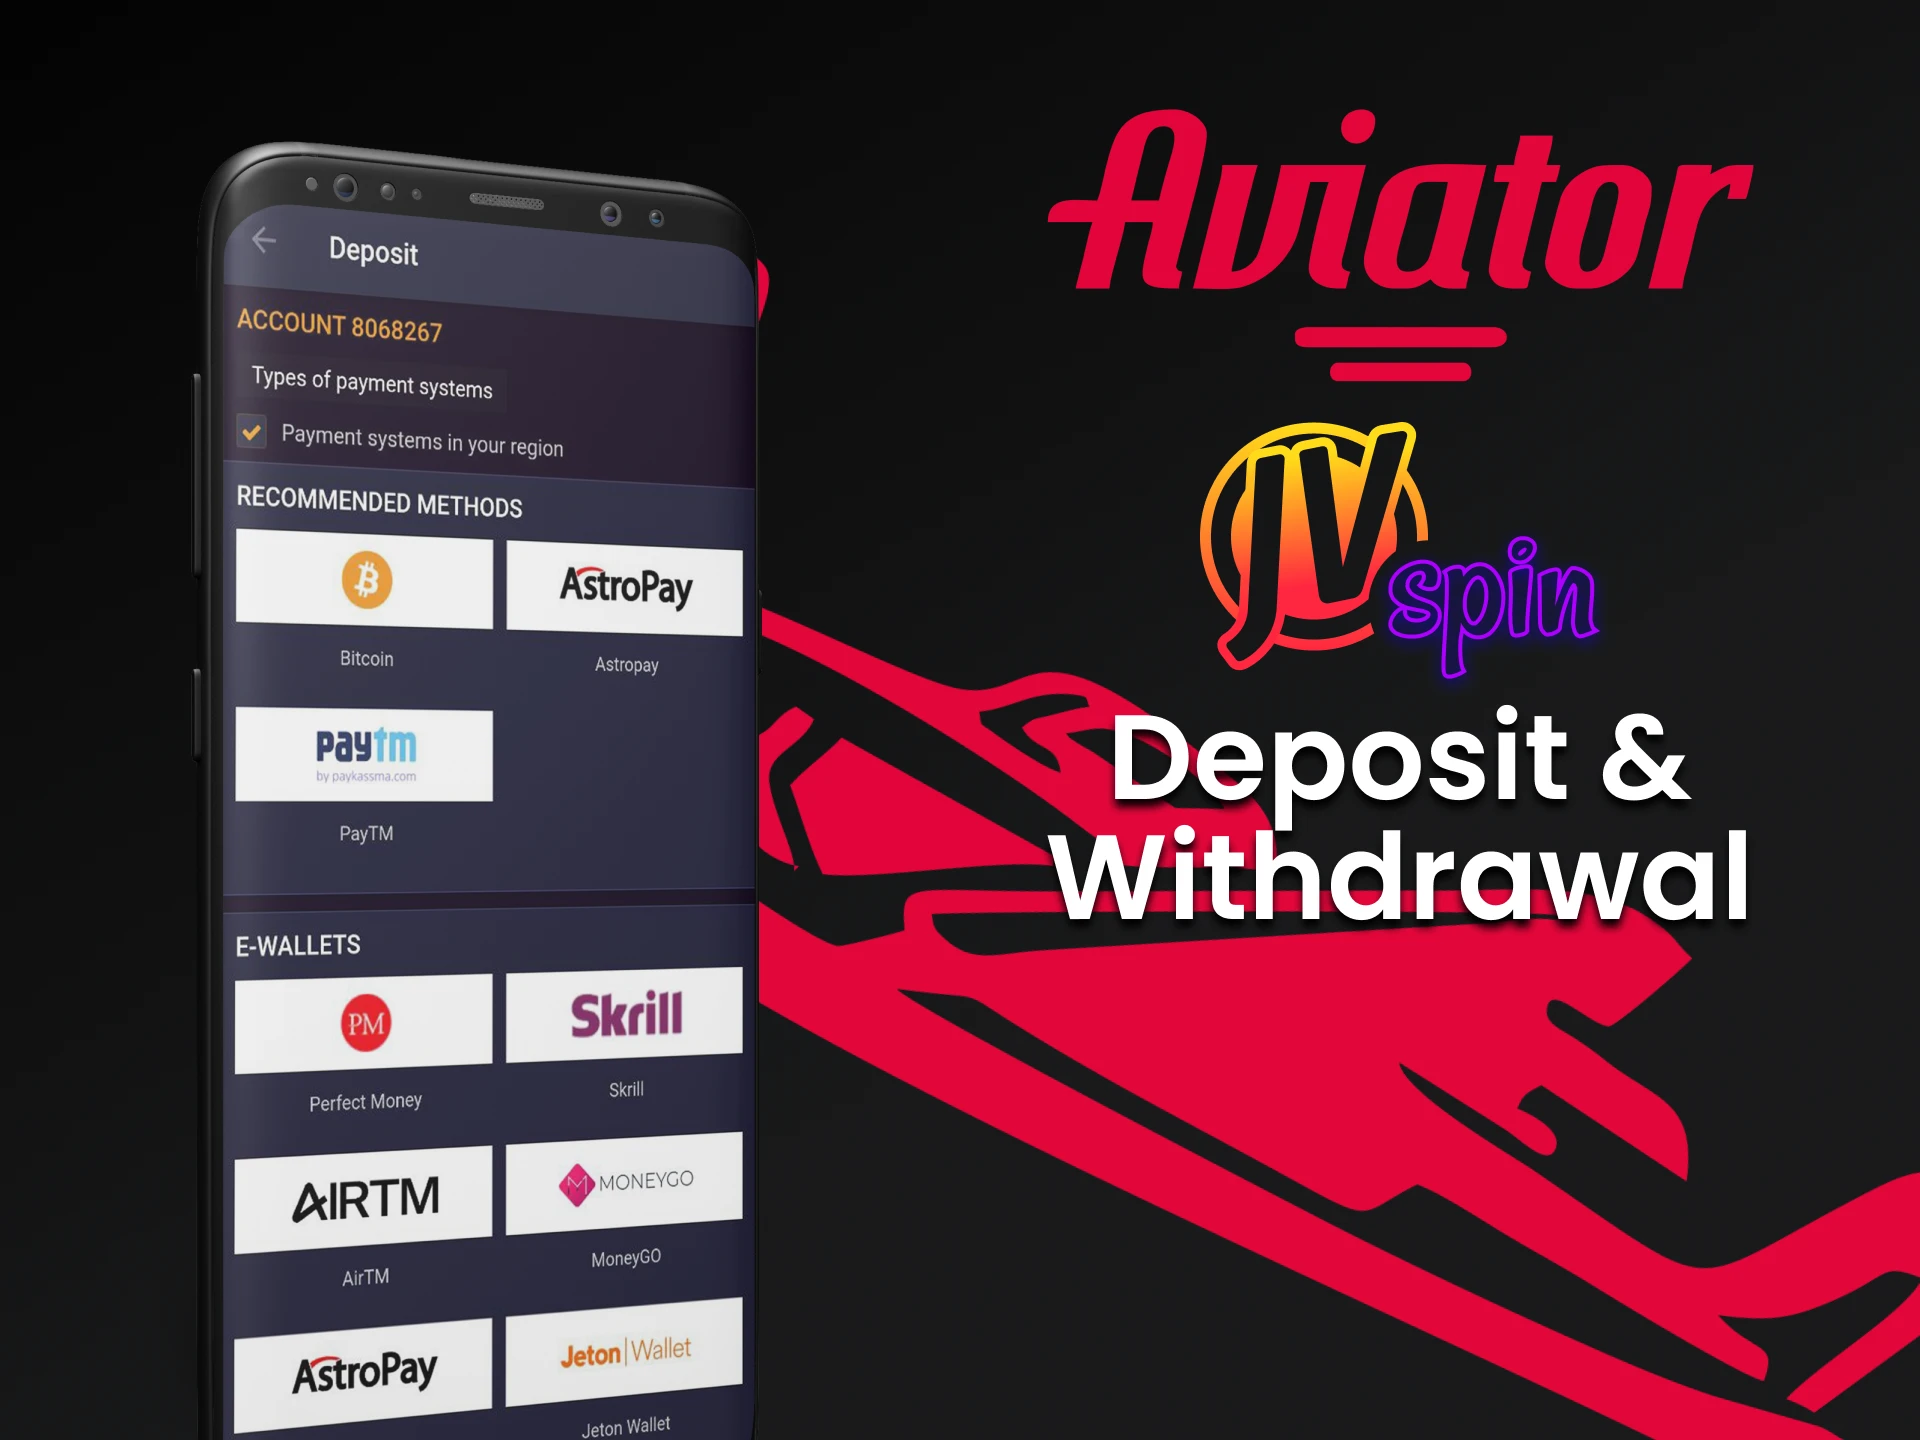 We will tell you about the transaction methods for the Aviator game in the JV Slot app.